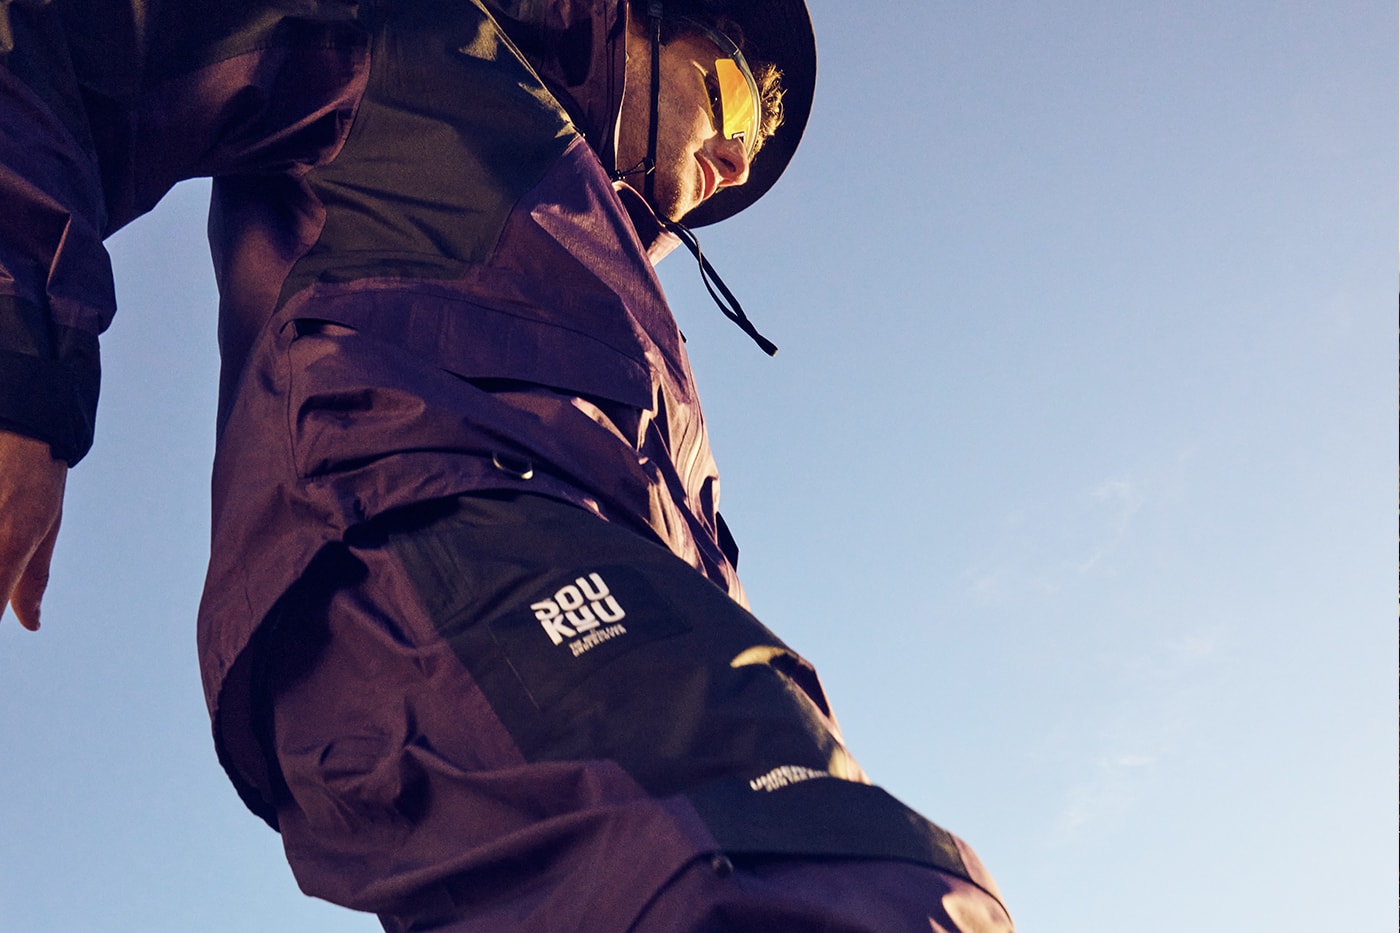 The North Face x UNDERCOVER Drop Second Collaboration "SOUKUU Season 2" japanese streetwear trailwear line parka outdoor practical pieces jun takahashi